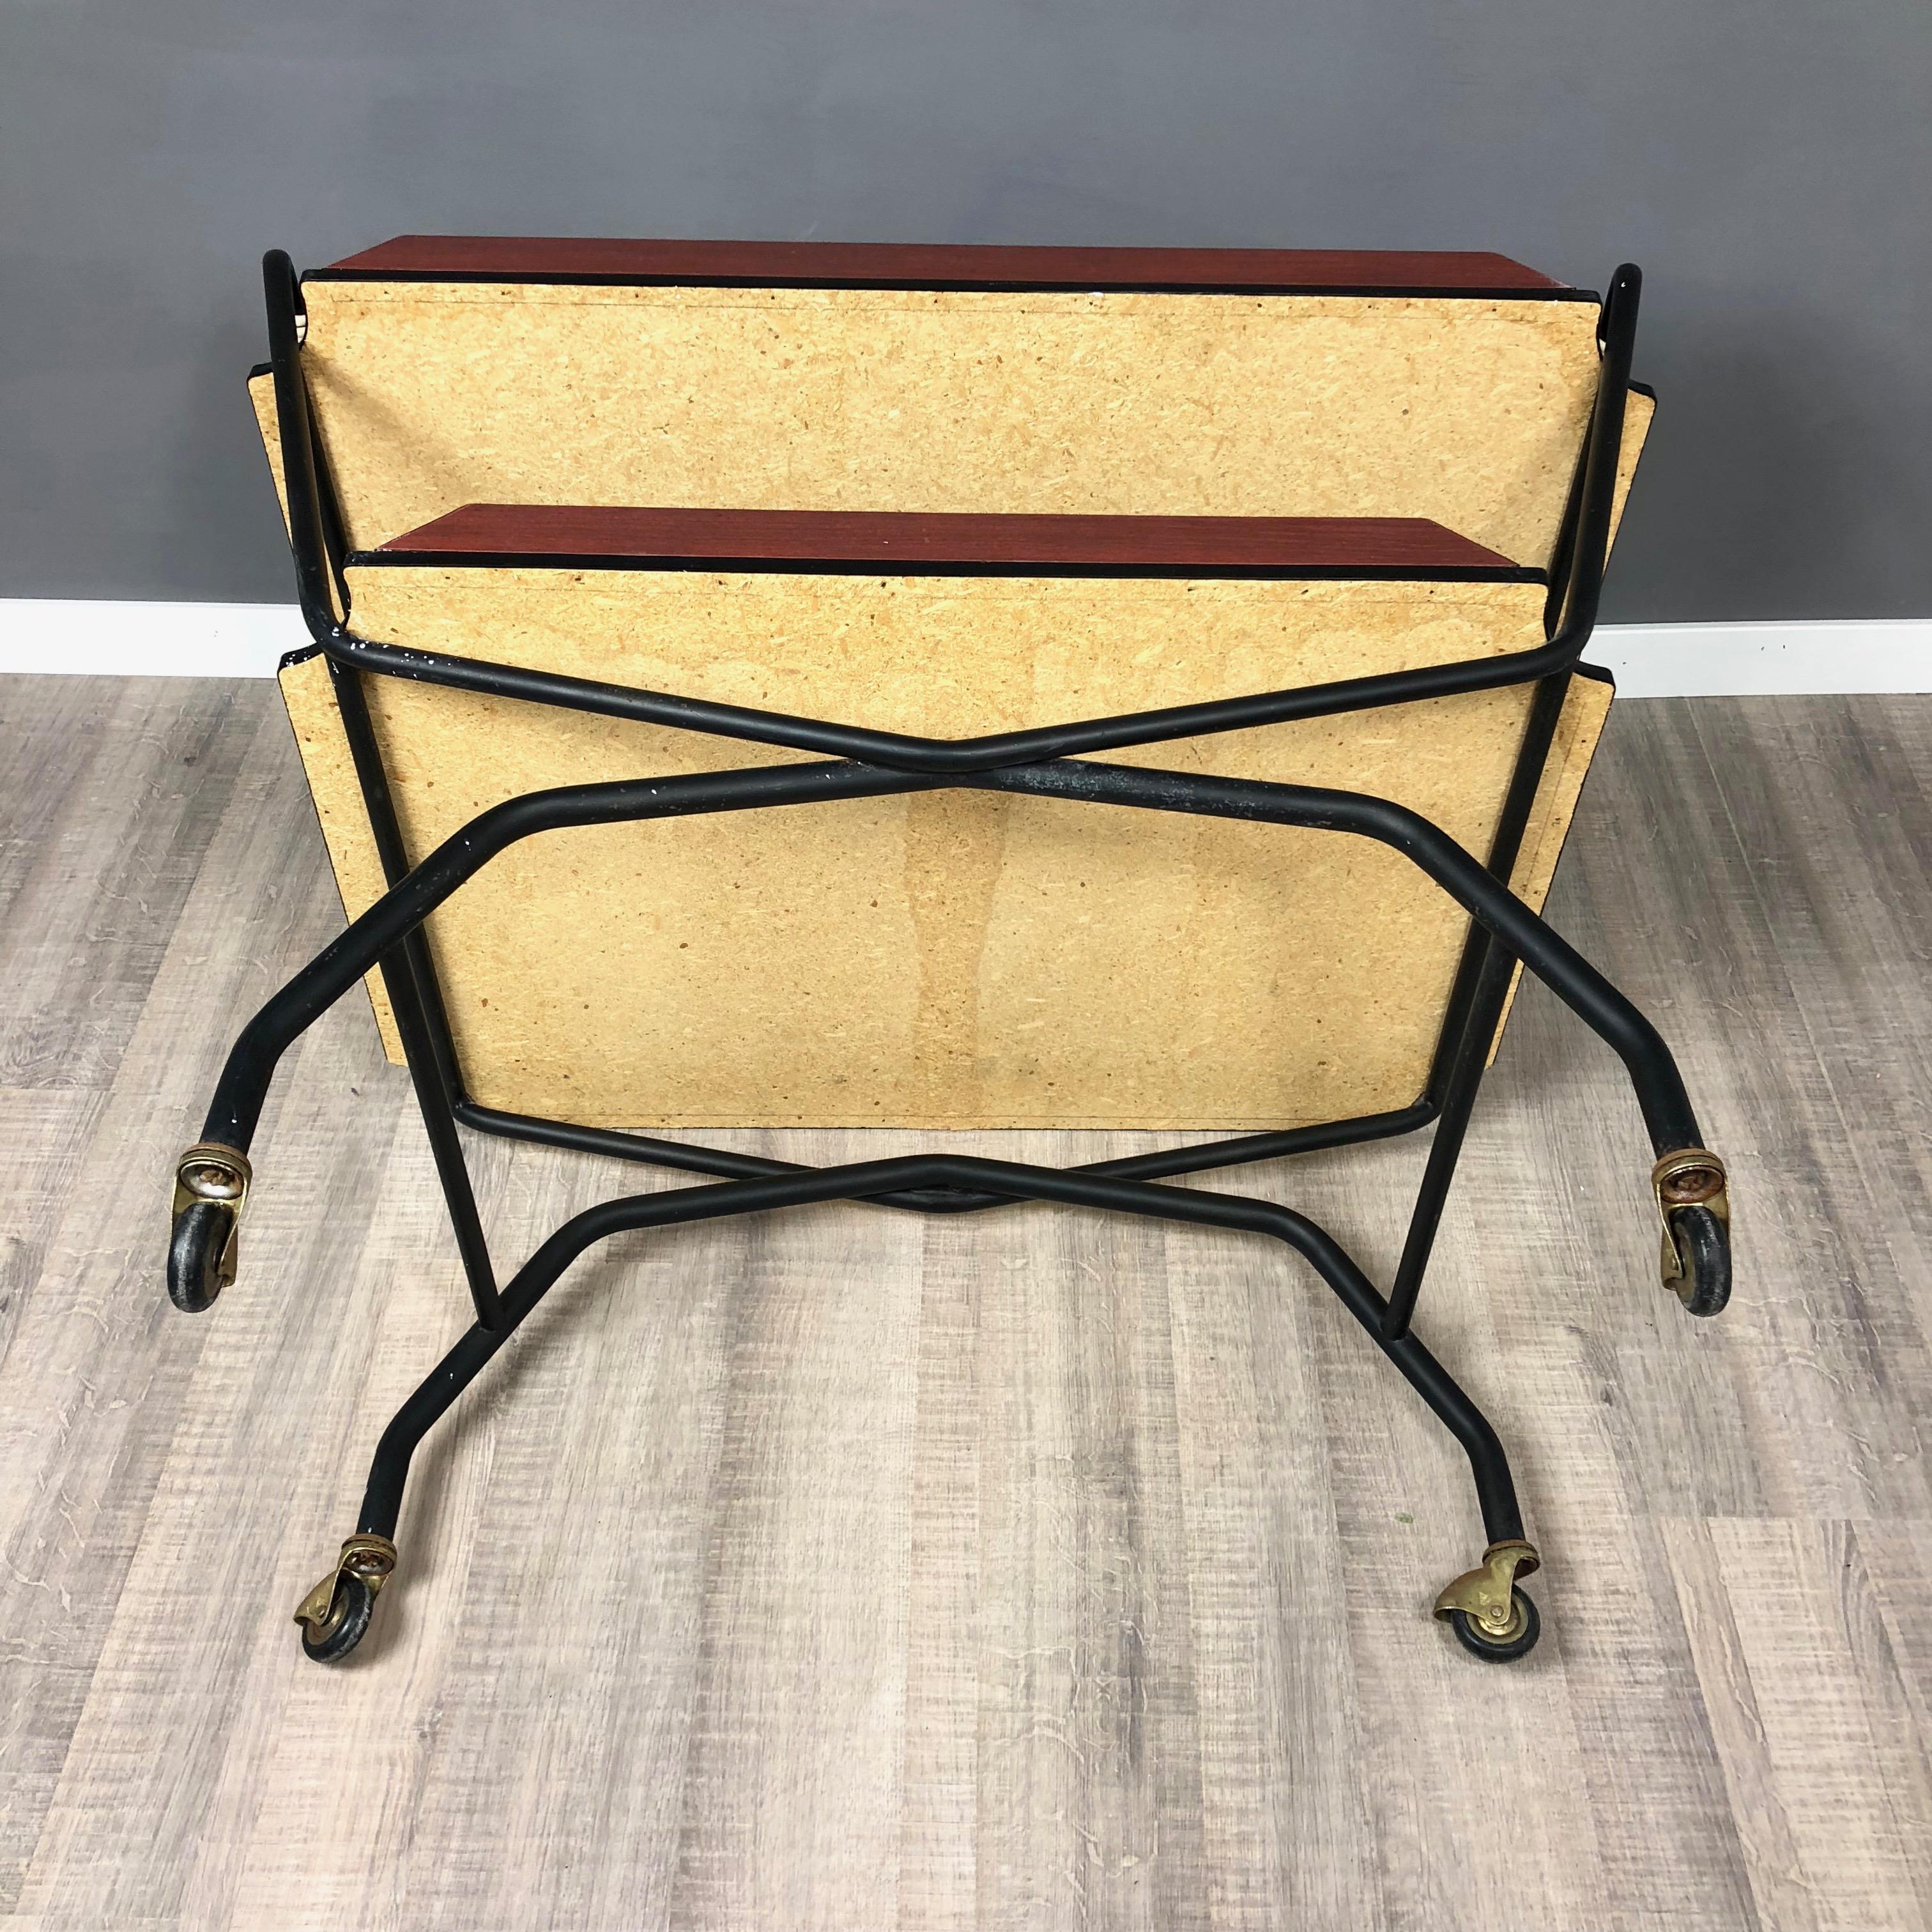 1970s Serving Tray Bar Cart Trolley in Formica and Metal Black and Red Brown For Sale 4